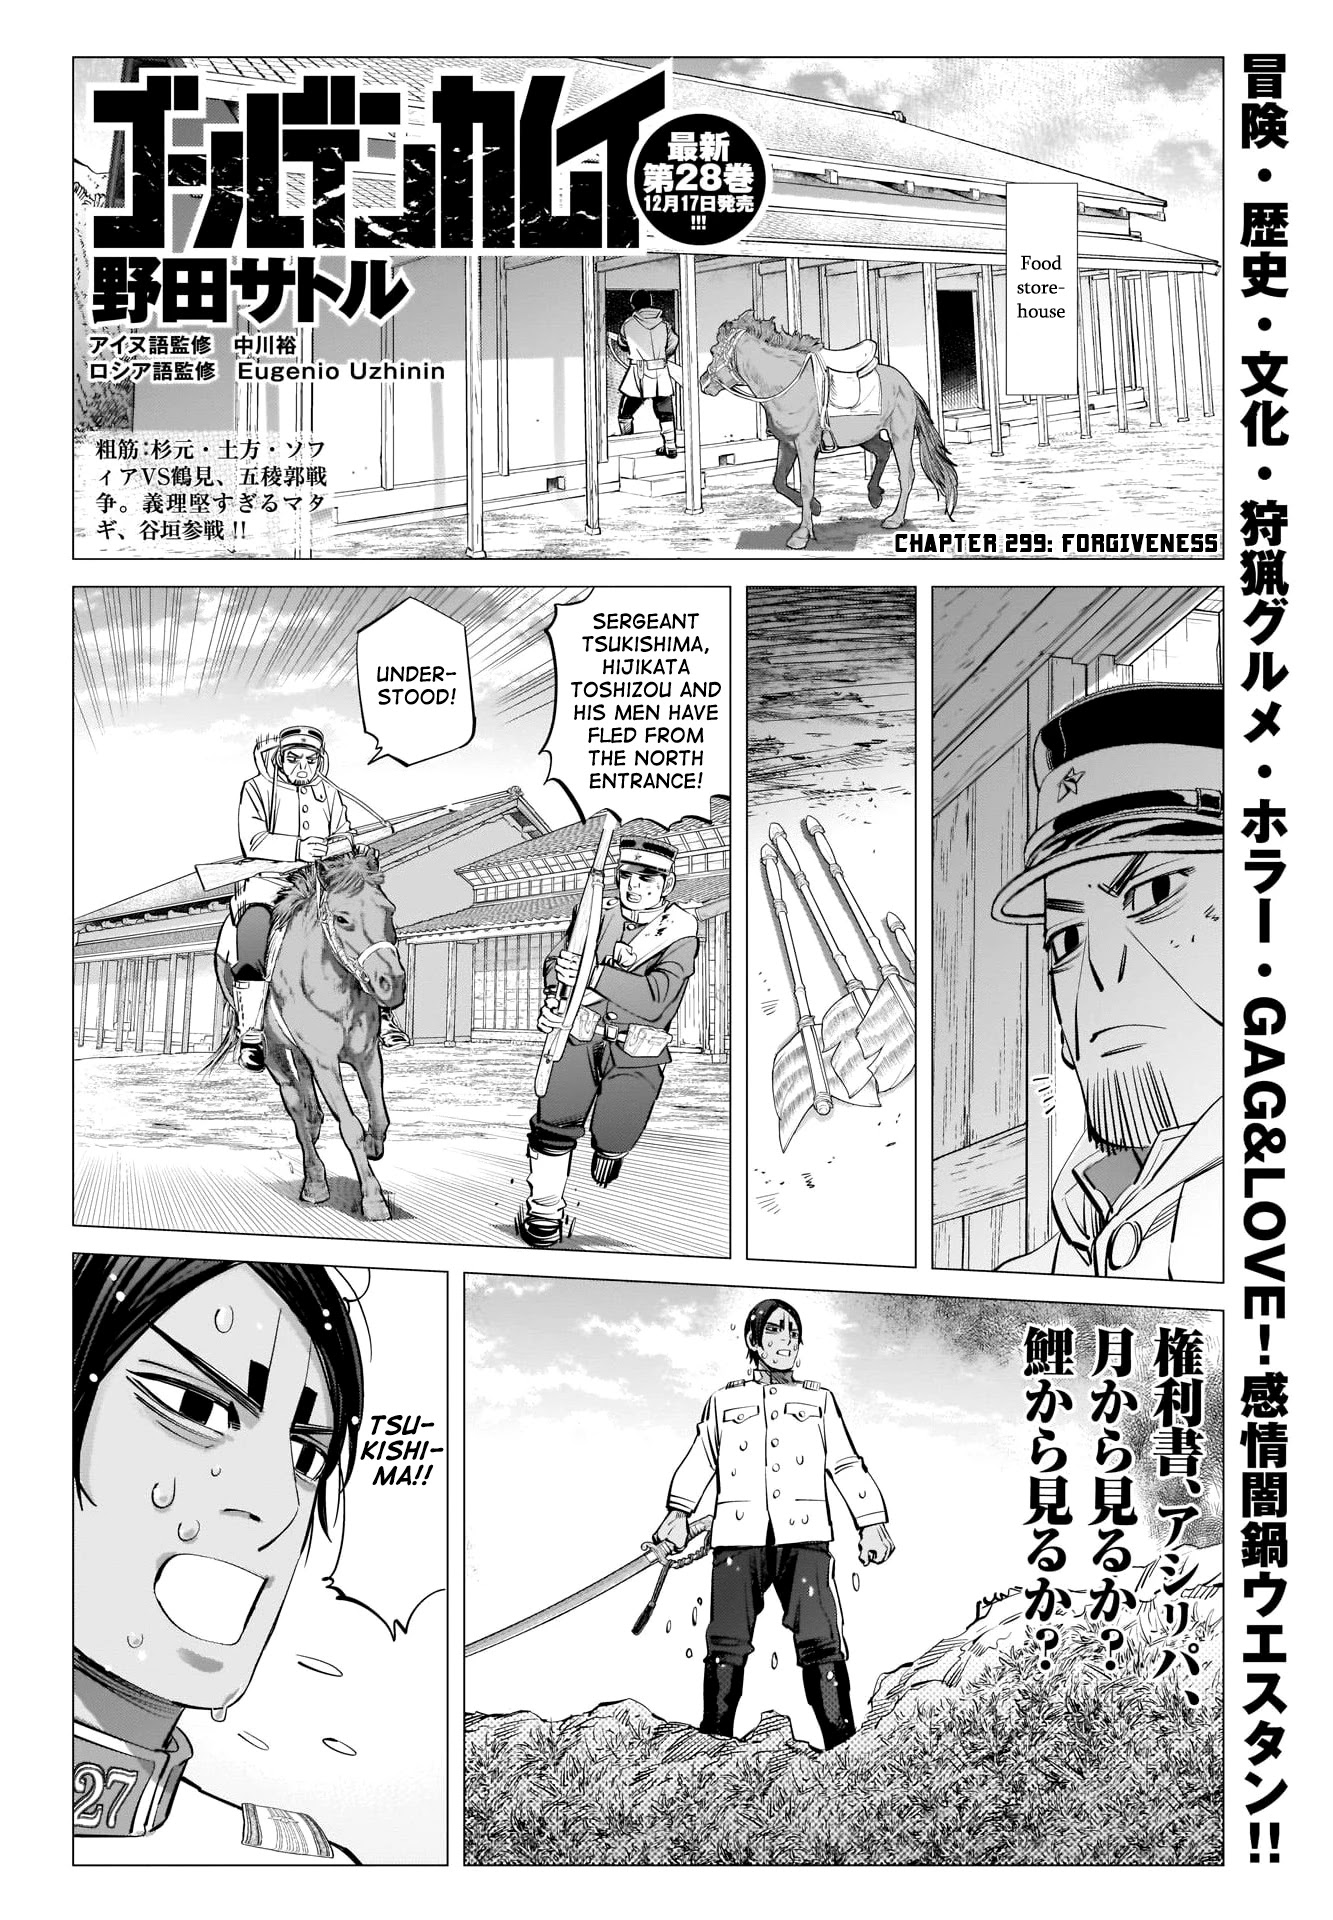 Golden Kamui Chapter 299: Forgiveness - Picture 1